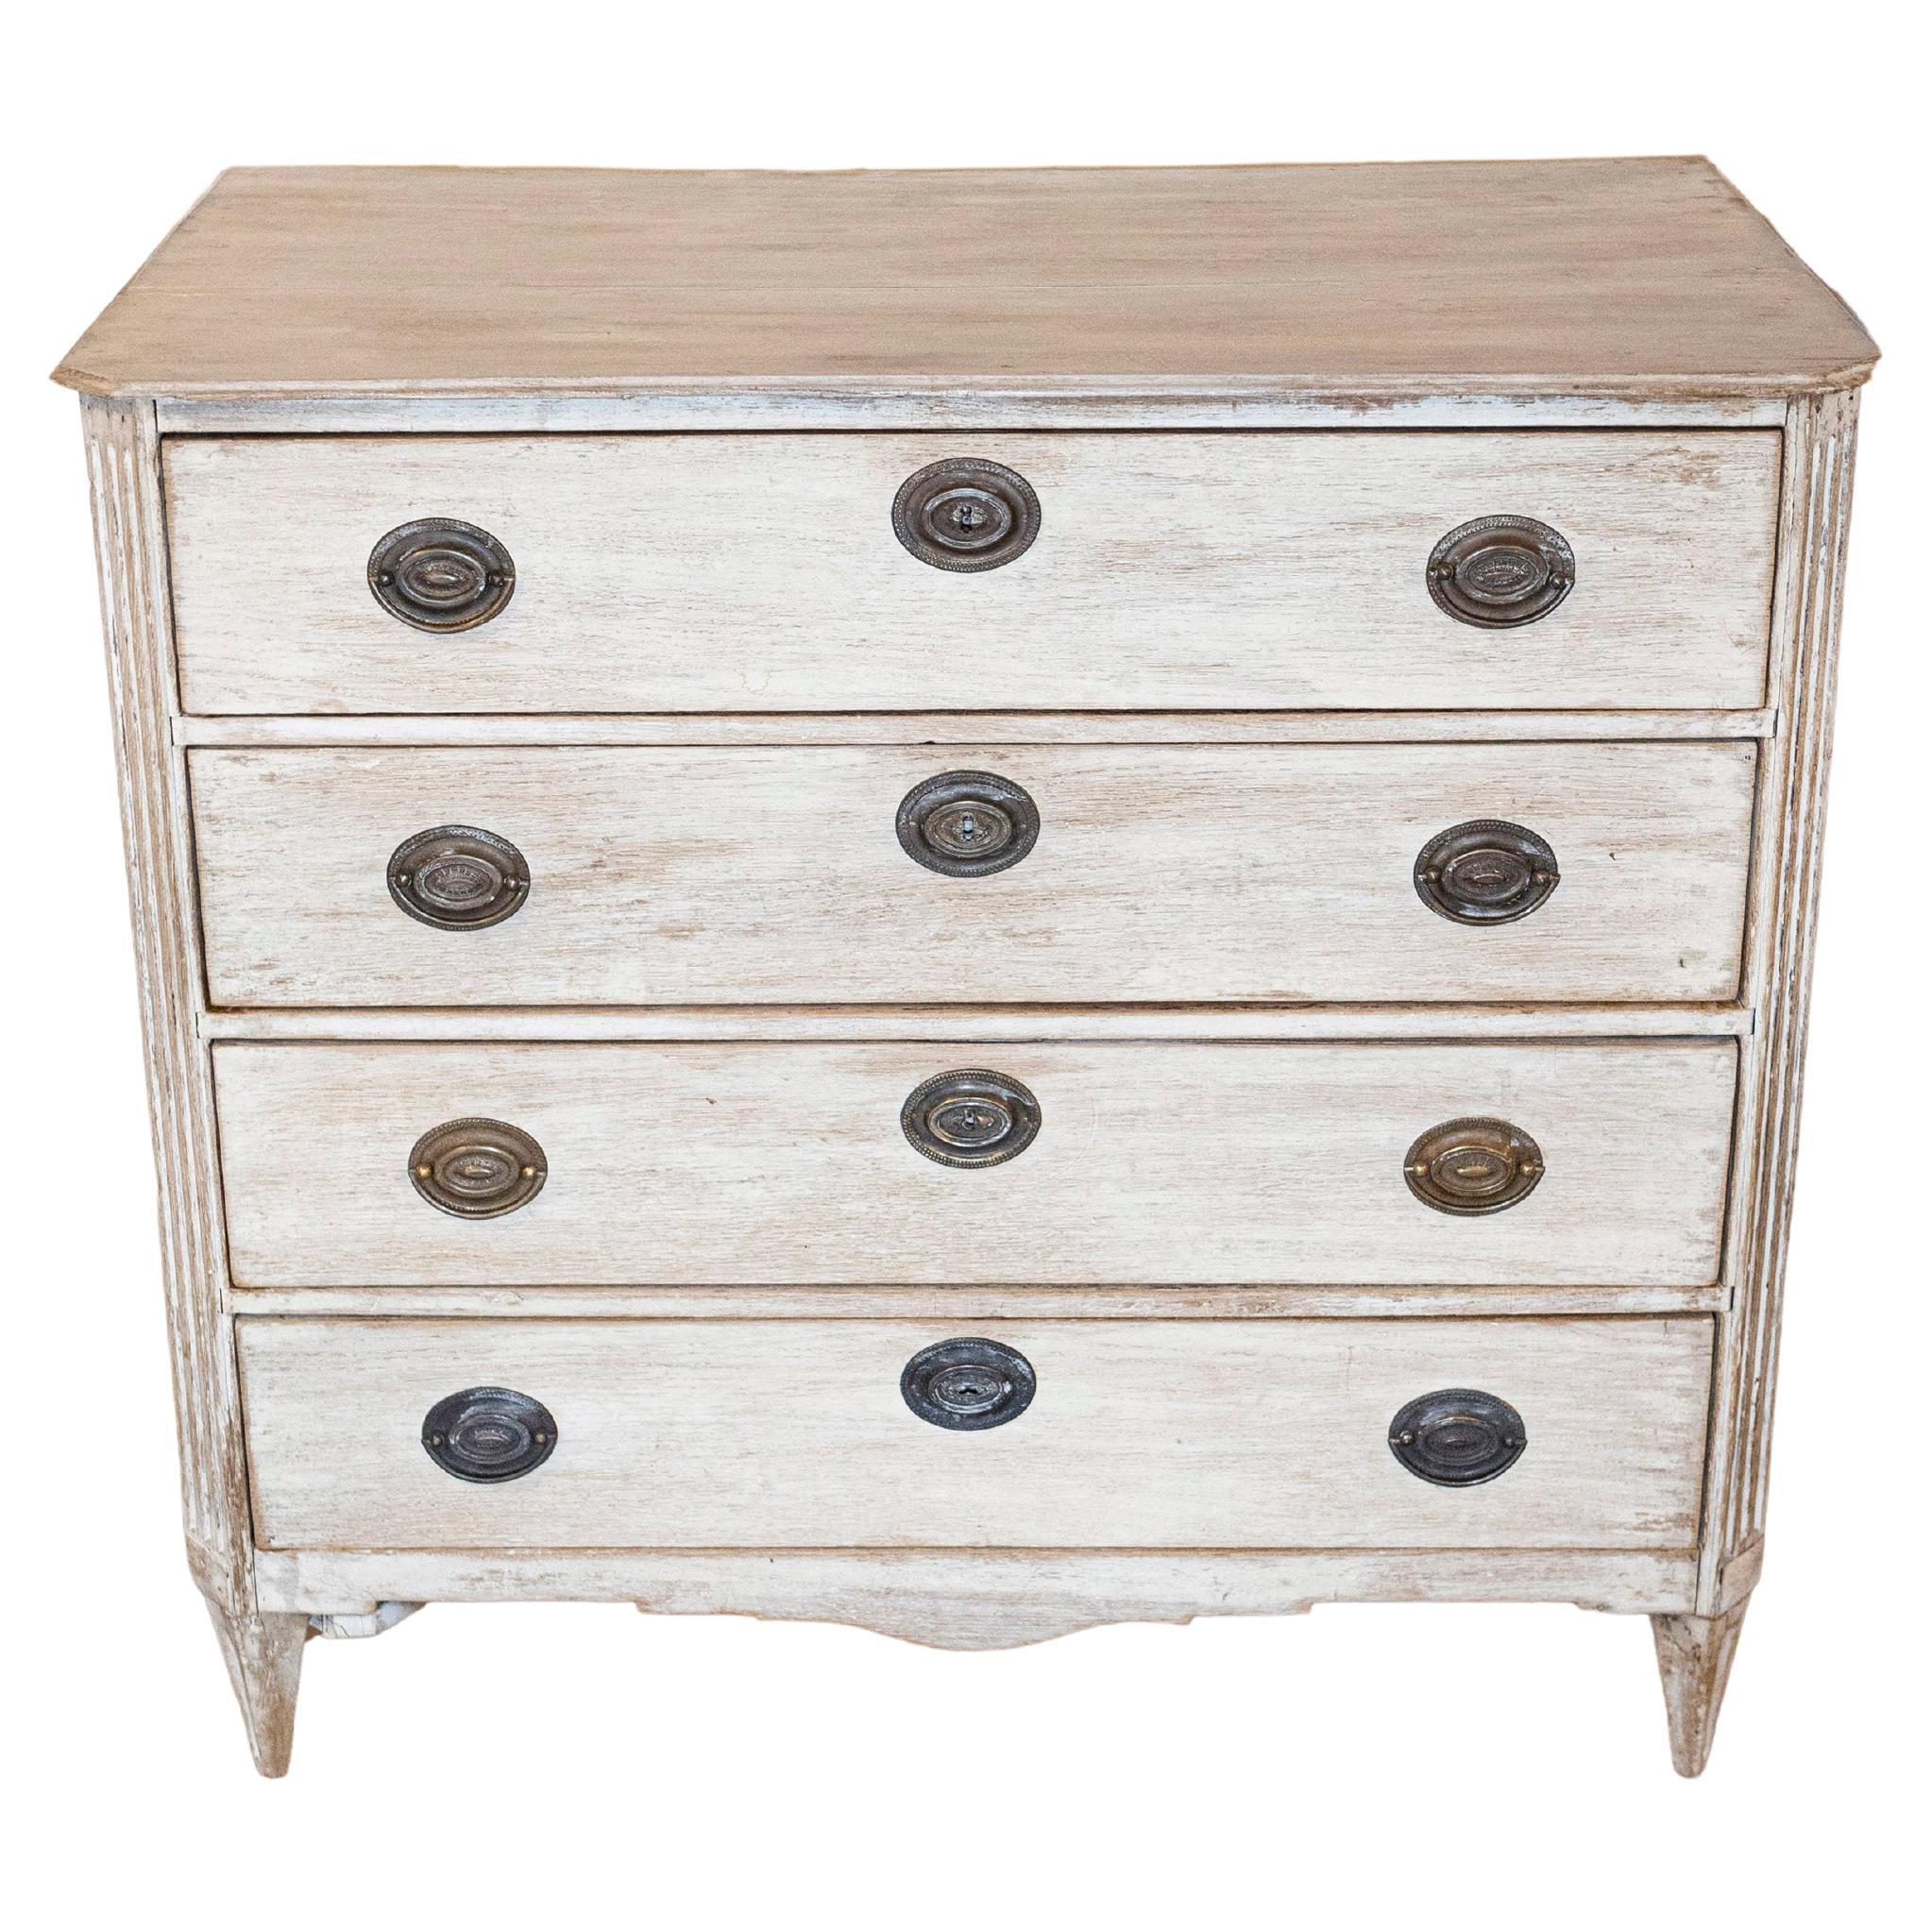 Swedish 1780s Gustavian Period Four-Drawer Commode with Chamfered Side Posts For Sale